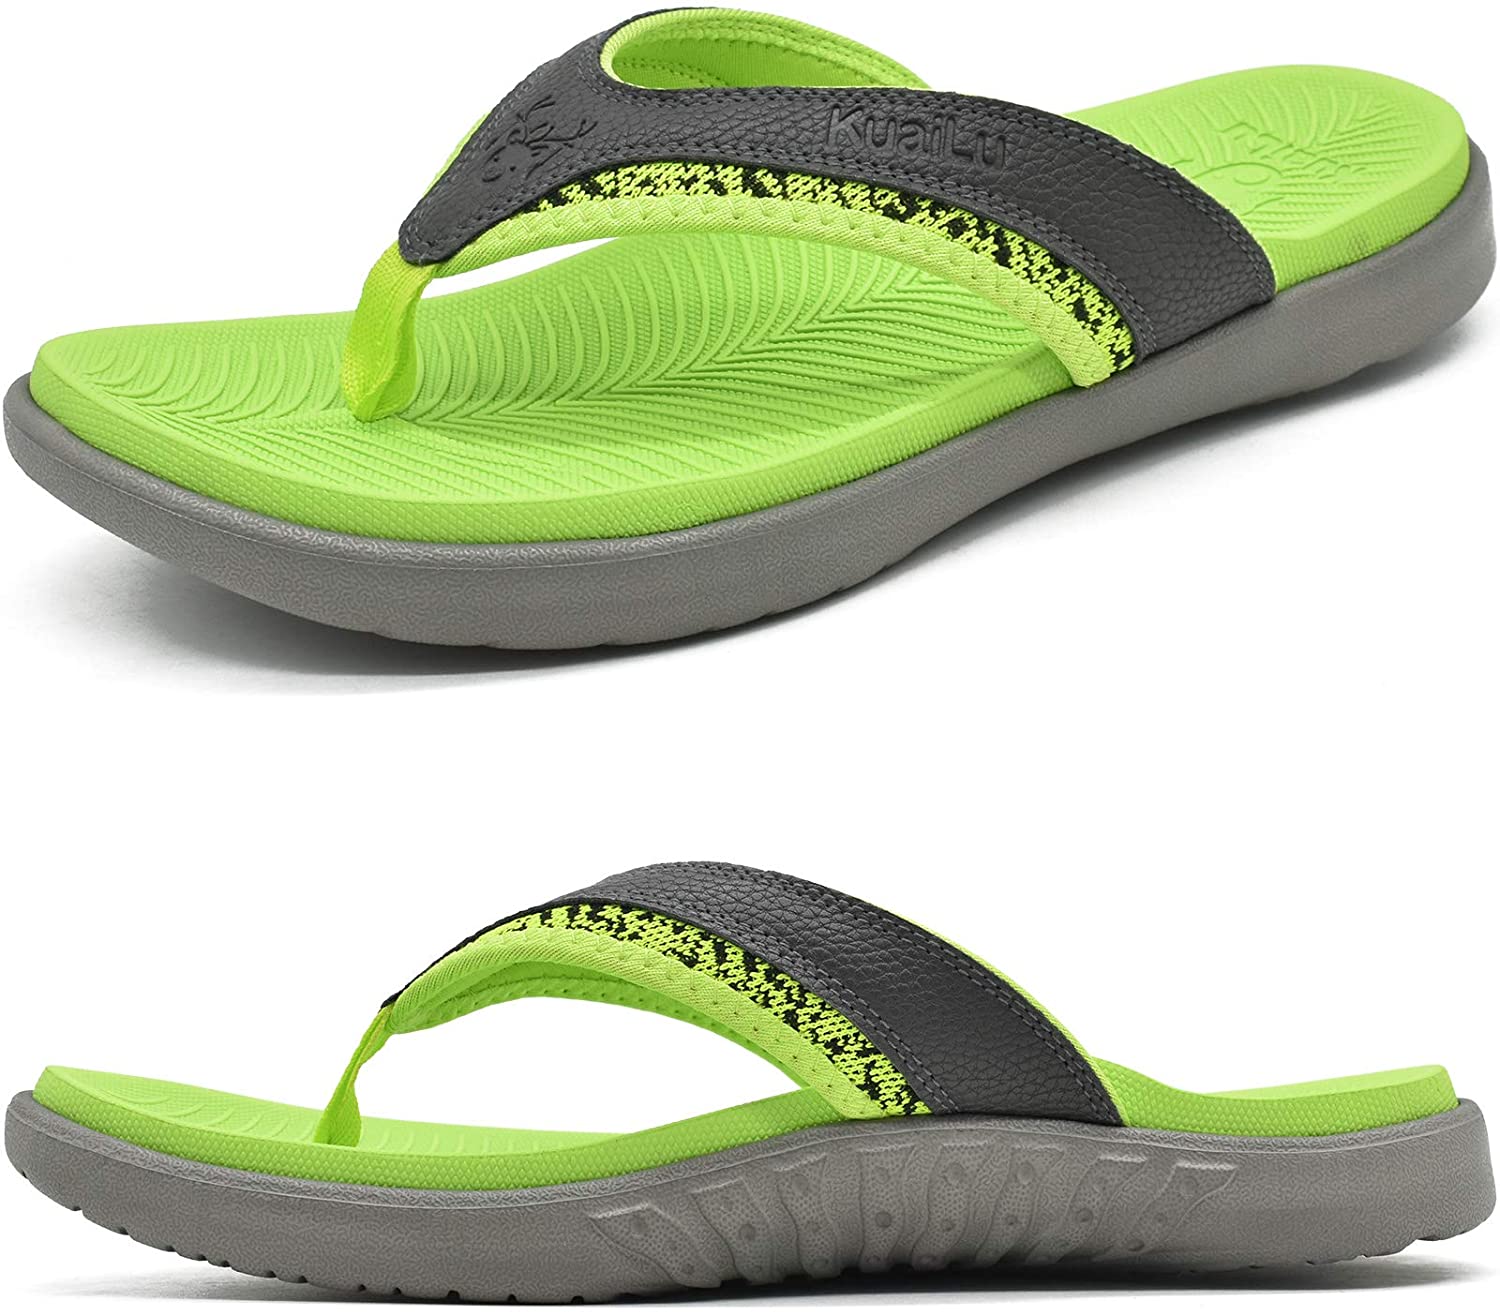 KuaiLu Mens Leather Sport Flip Flops Comfort Orthotic Thong Sandals with Plantar Fasciitis Arch Support for Outdoor Summer Size 7~13 